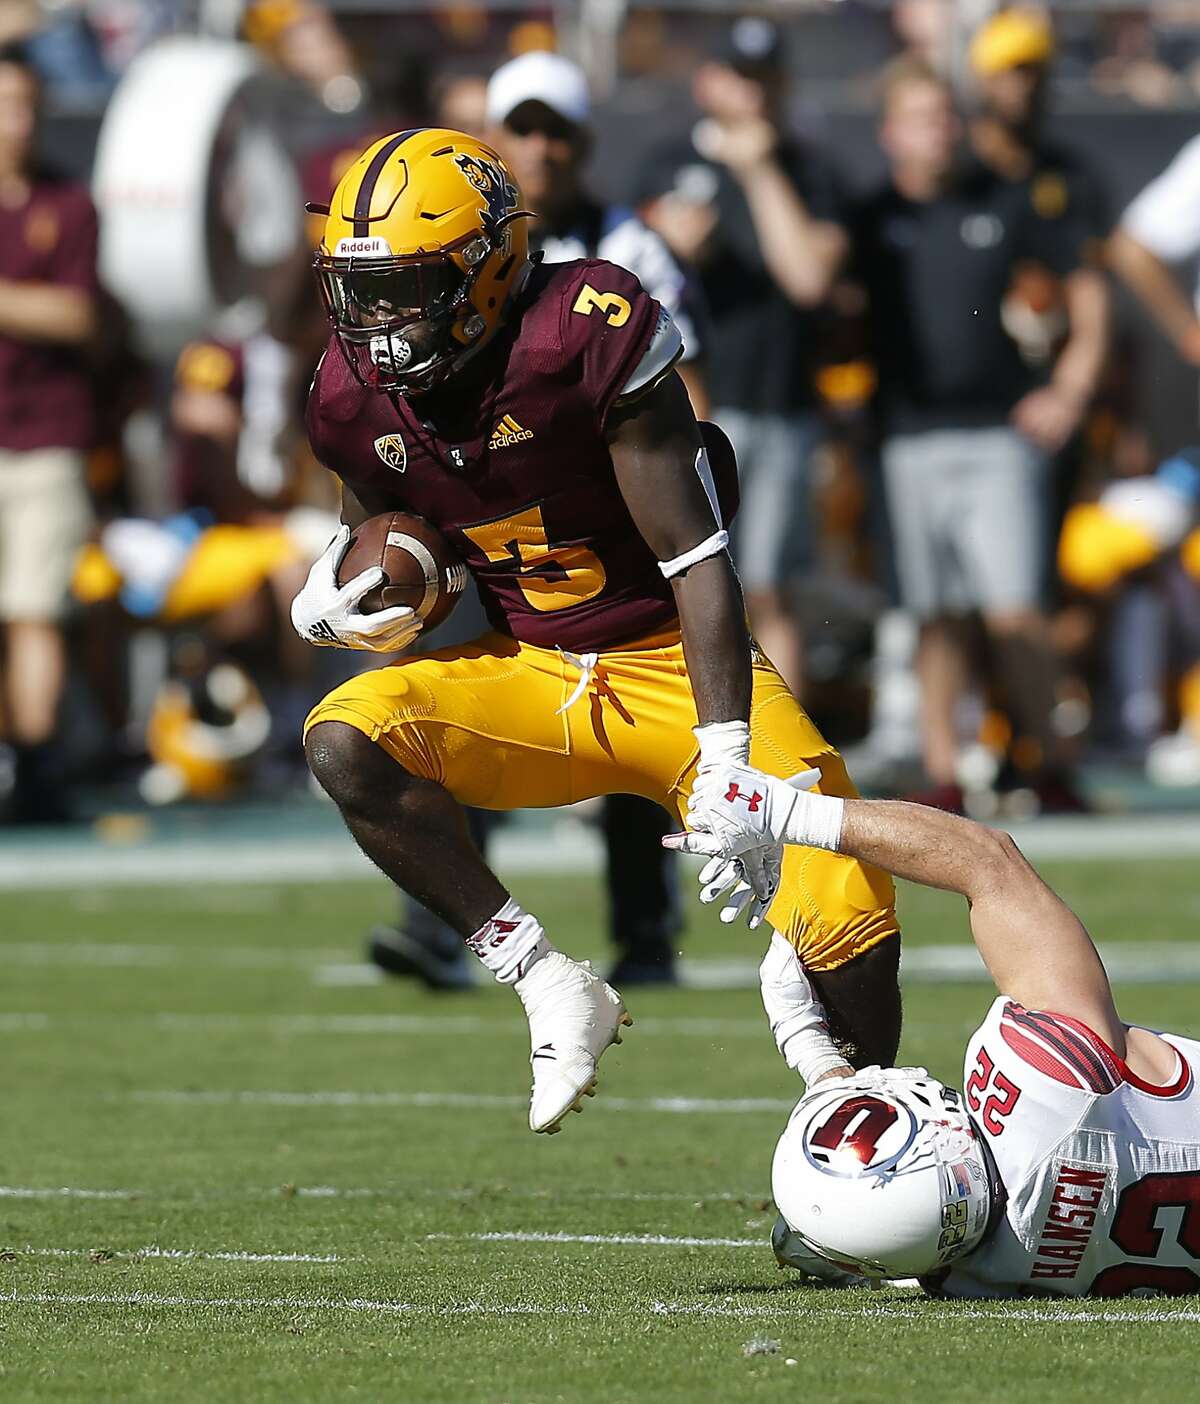 RB: Eno Benjamin, Arizona State Benjamin is one of the most effective backs in the country, plain and simple. Last season, he rushed for 1,642 yards and 16 touchdowns – the third and eighth best marks in the NCAA, respectively. He's the centerpiece of ASU's offense.